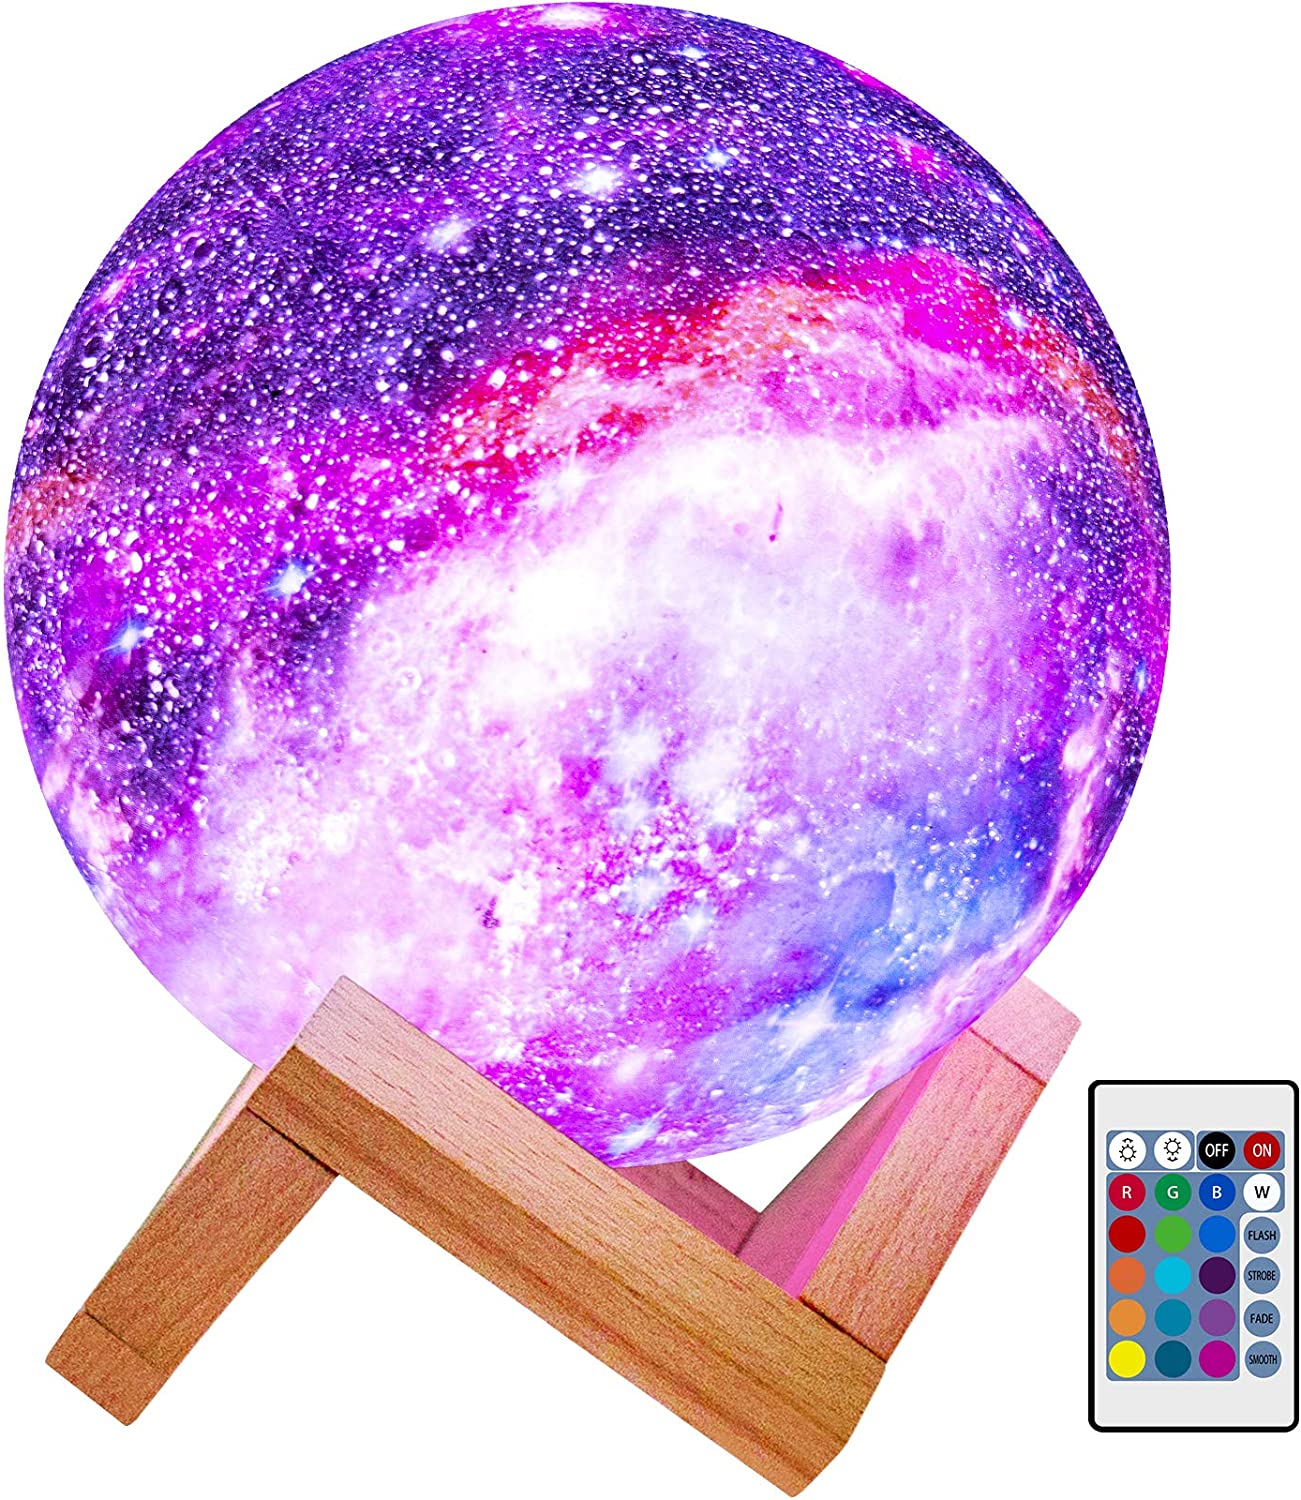 BRIGHTWORLD Moon Lamp Kids Night Light Galaxy Lamp 5.9 inch 16 Colors LED 3D Star Moon Light with Wood Stand, Remote & Touch Control USB Rechargeable Gift for Baby Girls Boys Birthday - Baby Mood Lamp